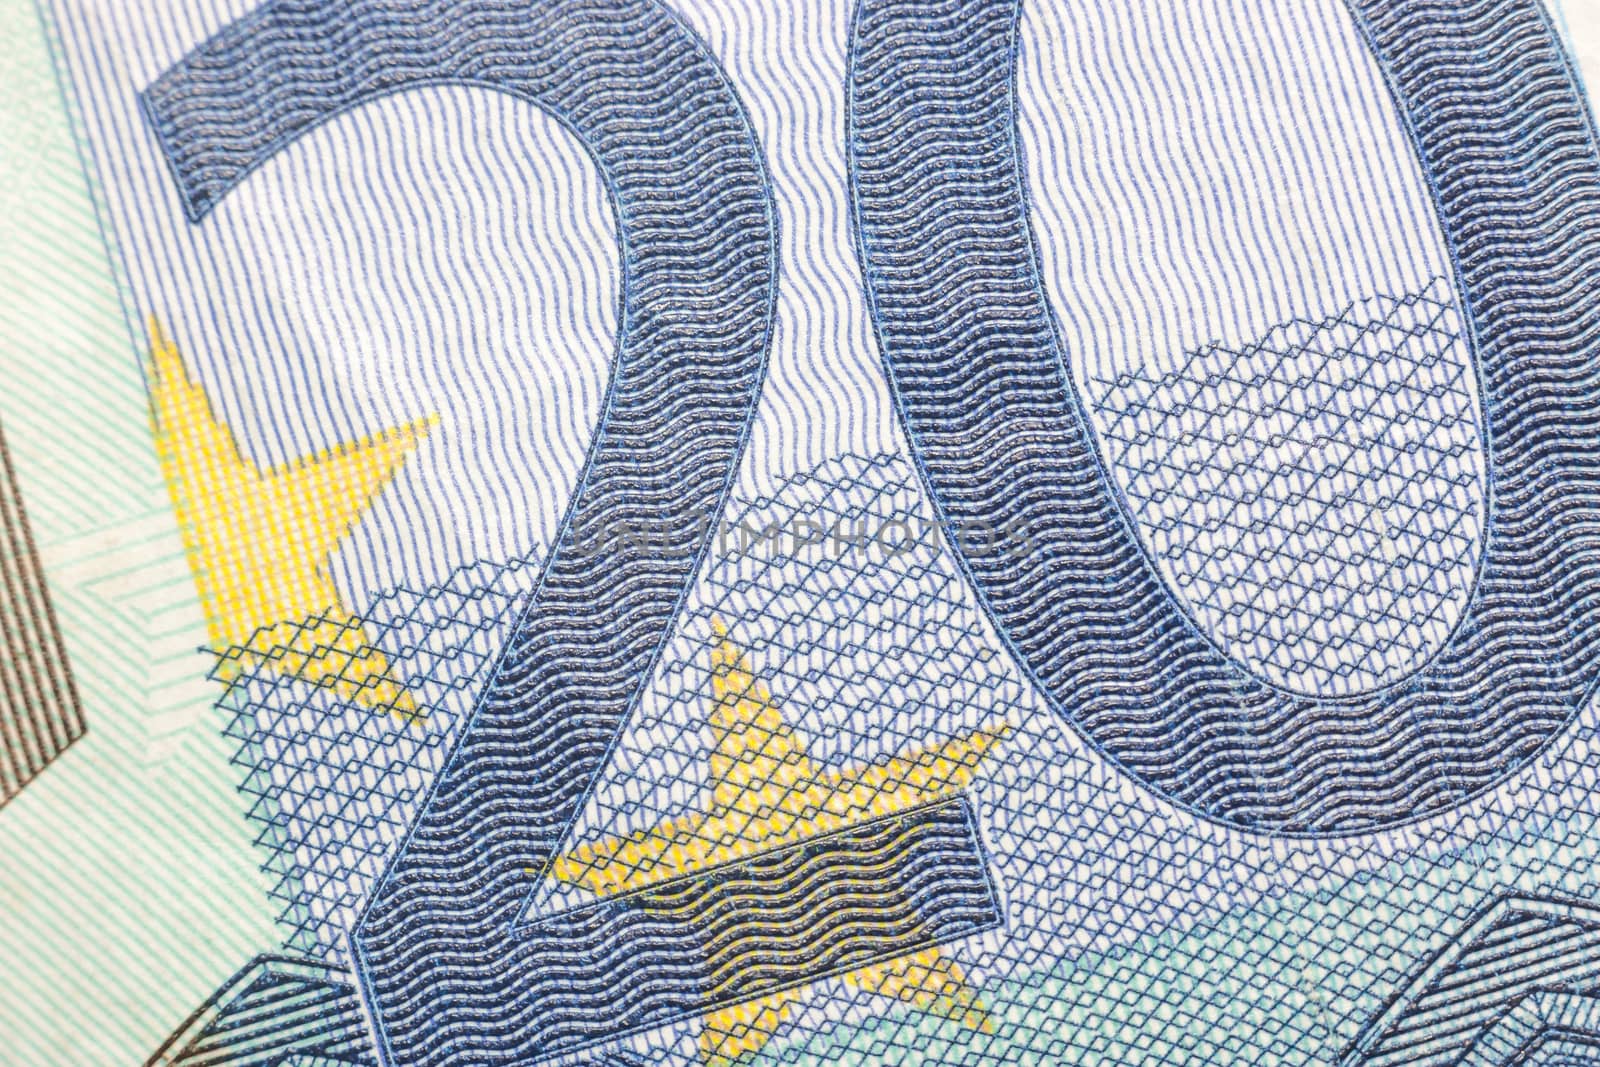 Euro banknotes, detailed on a new 20 euro banknotes by mailos